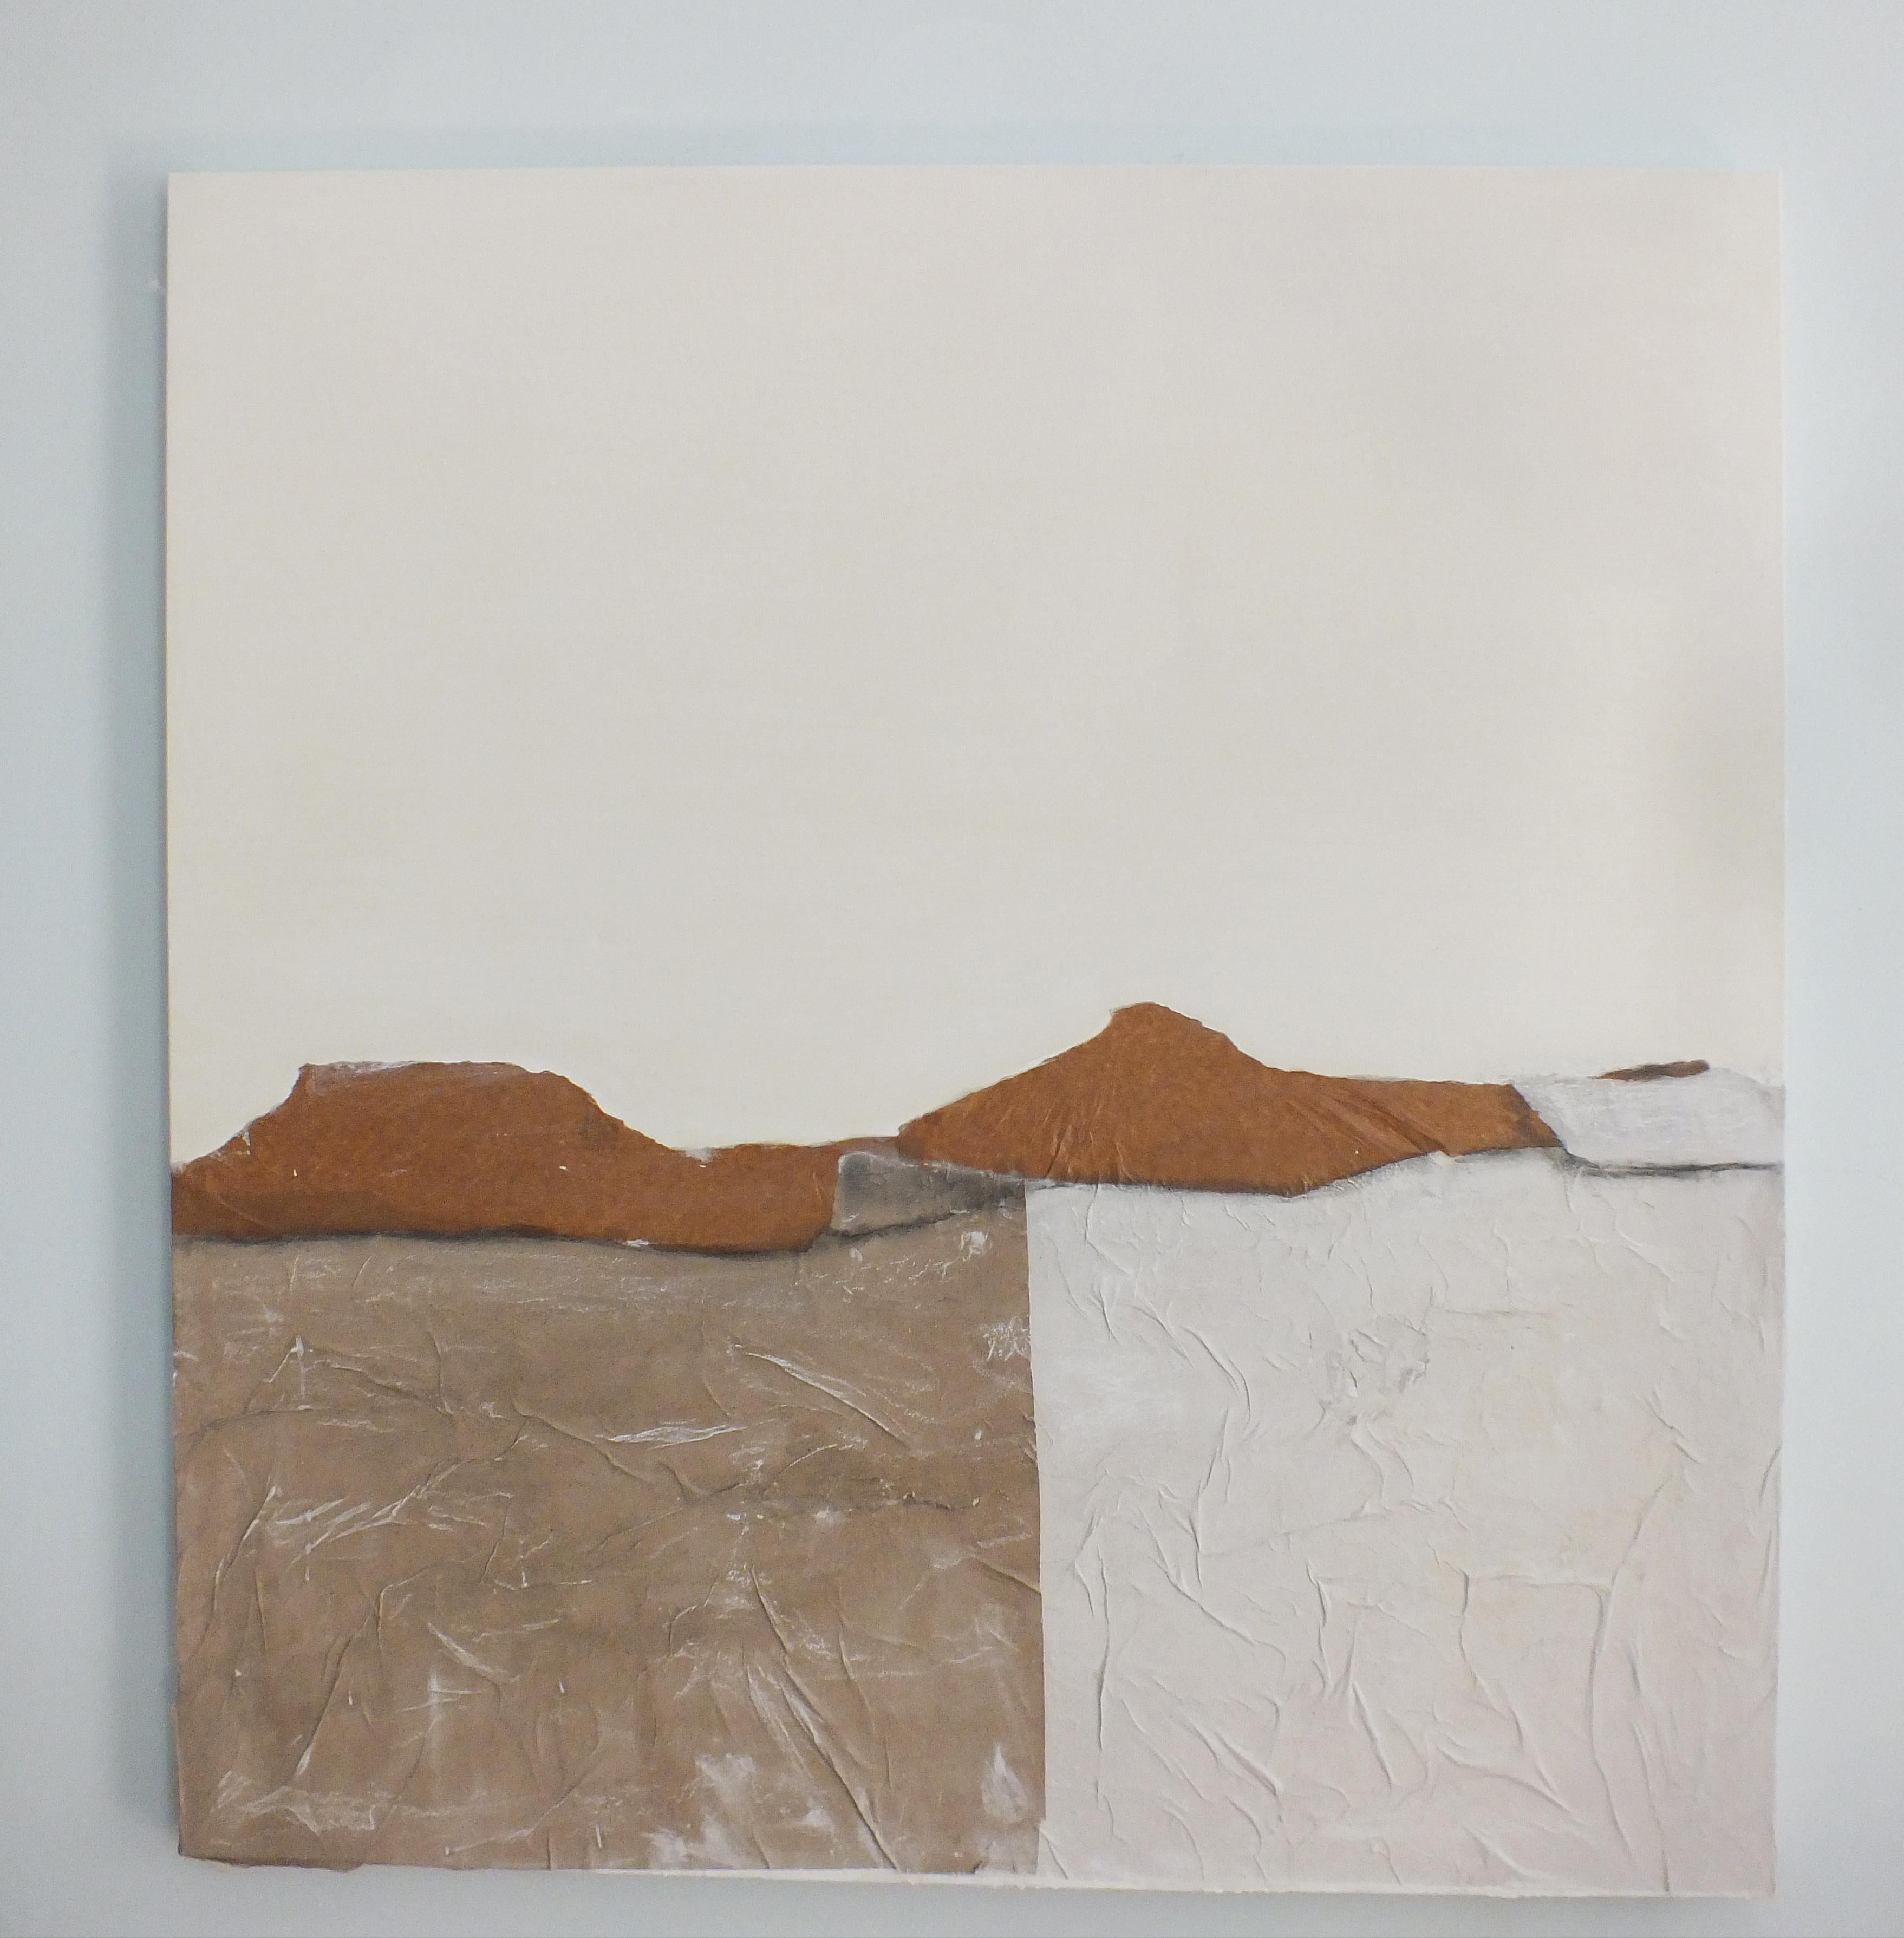 PaperLandscape
mixed media and collage on canvas
100 x100 cm
original art
Ready to Hang

